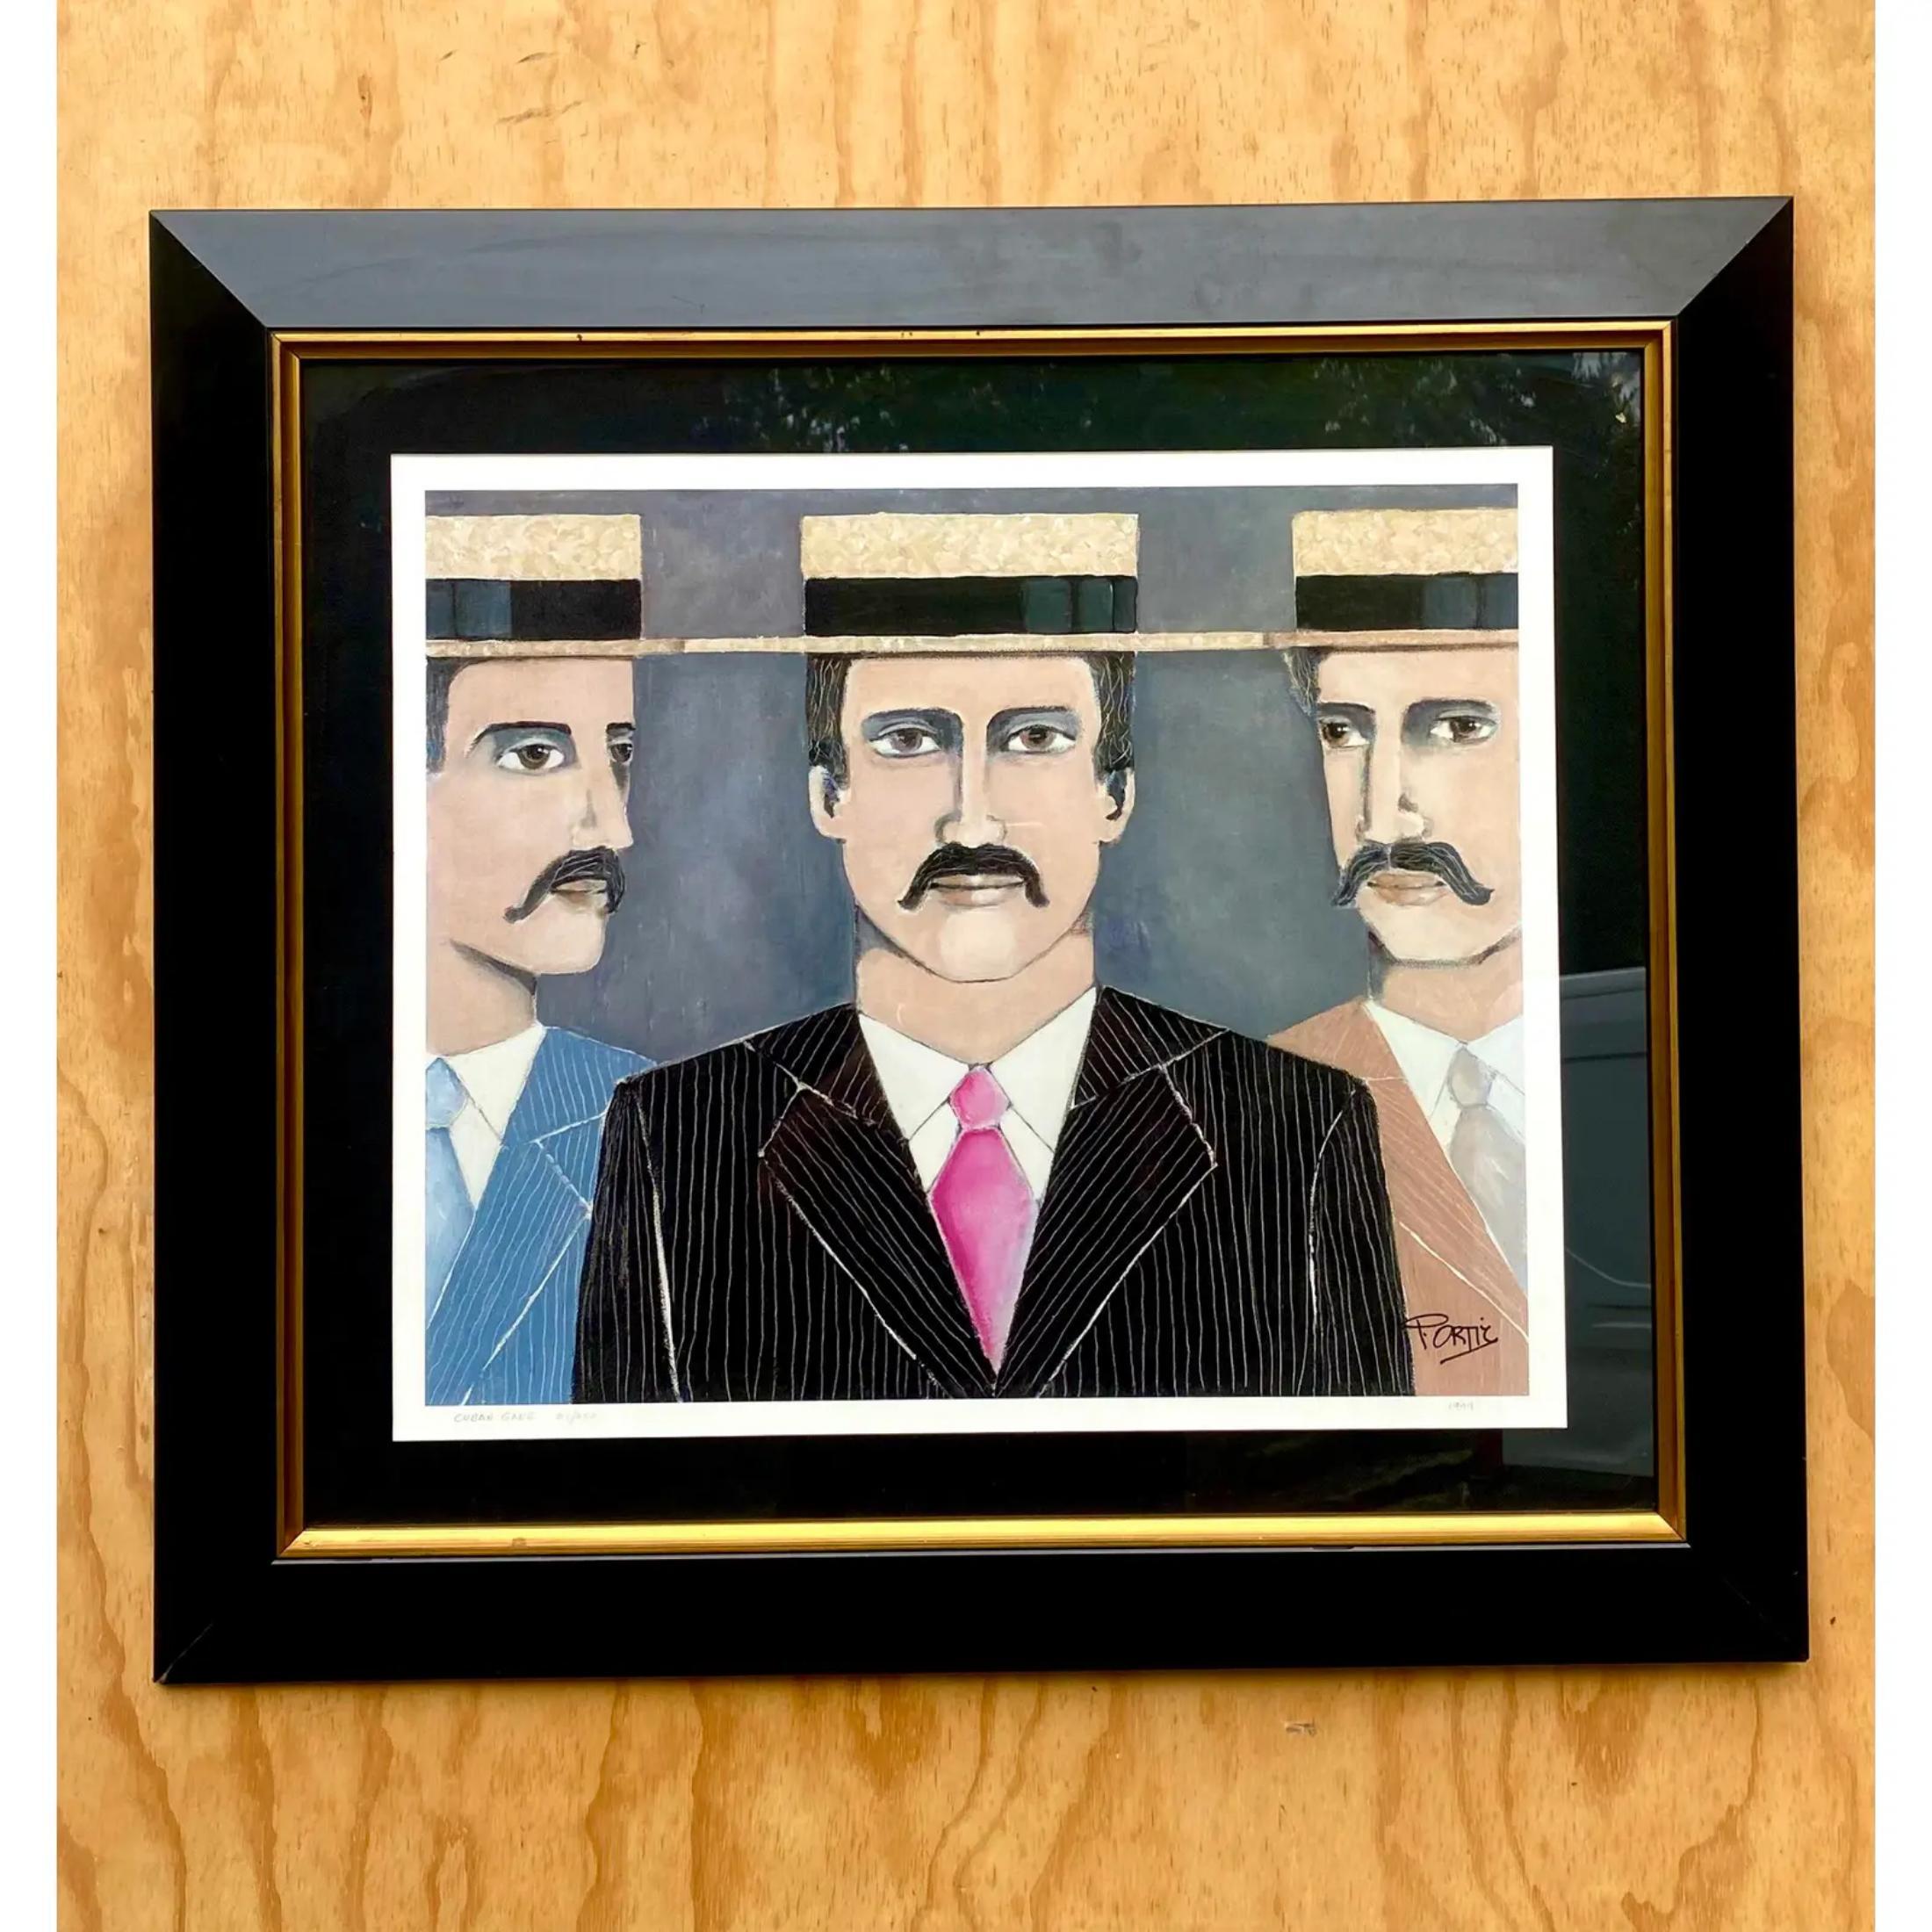 Fabulous vintage lithograph. Signed by the artist Pedro Ortiz. Three handsome gentlemen with mustaches. The title of the work is “Cuban Gang”. Acquired from a Oalm Beach estate